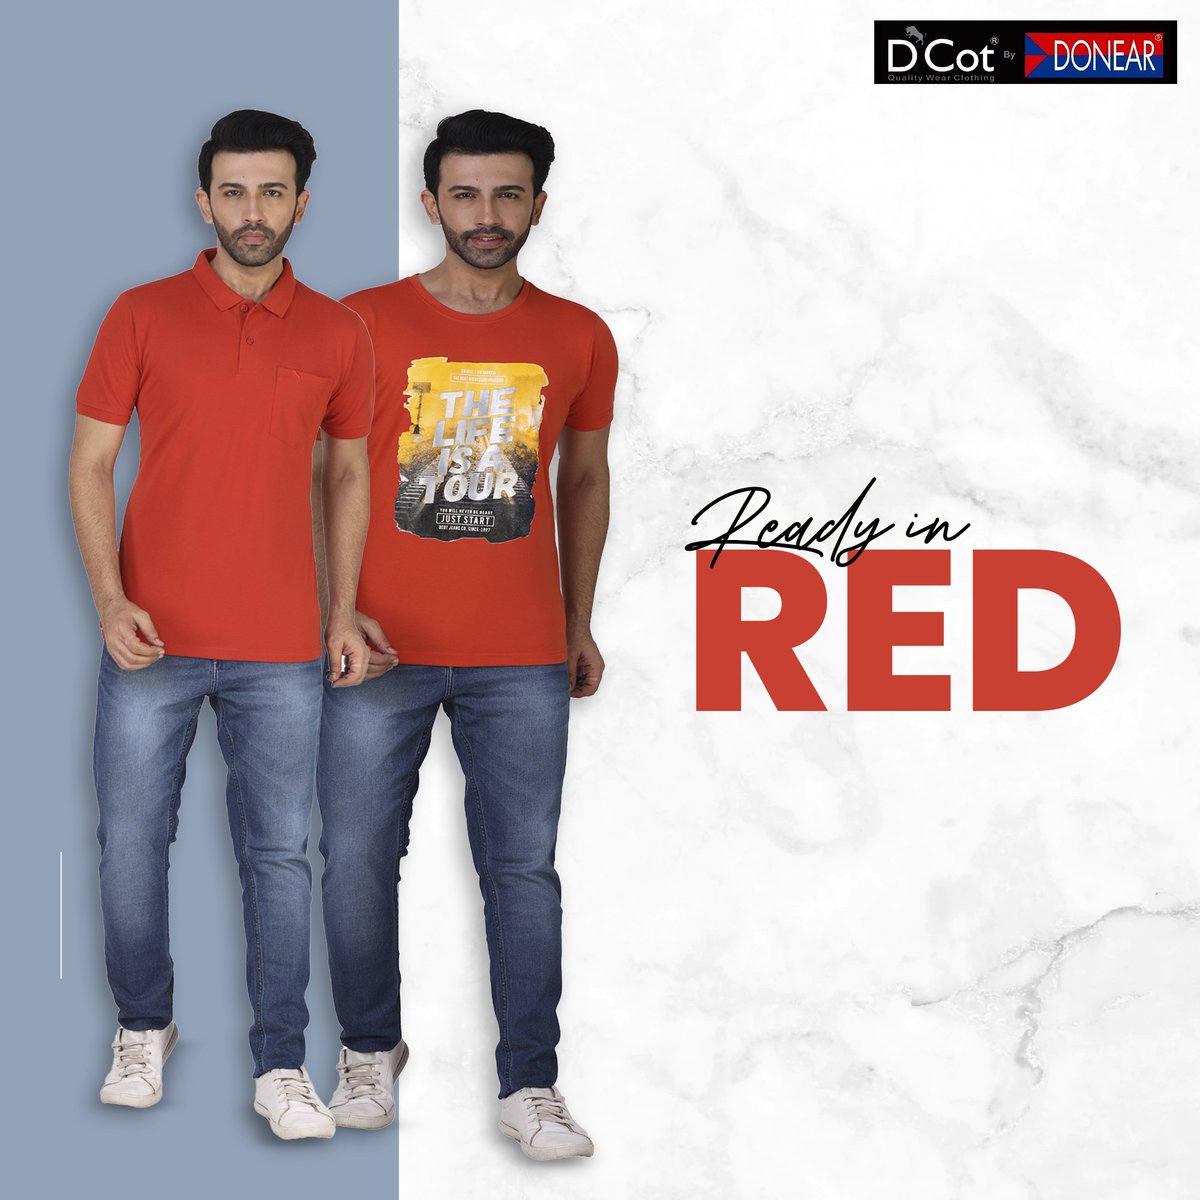 Brighten up your day with a red shirt fit for the office, date night or a night out on the town ❤
#mensfashion #shirtsformen #mensfashiontips #indianbrand #vocalforlocal
#mensfashionstyles #indianbrands #mensoutfitideas #mensclothingindia #shirtsformens #semiformalformen